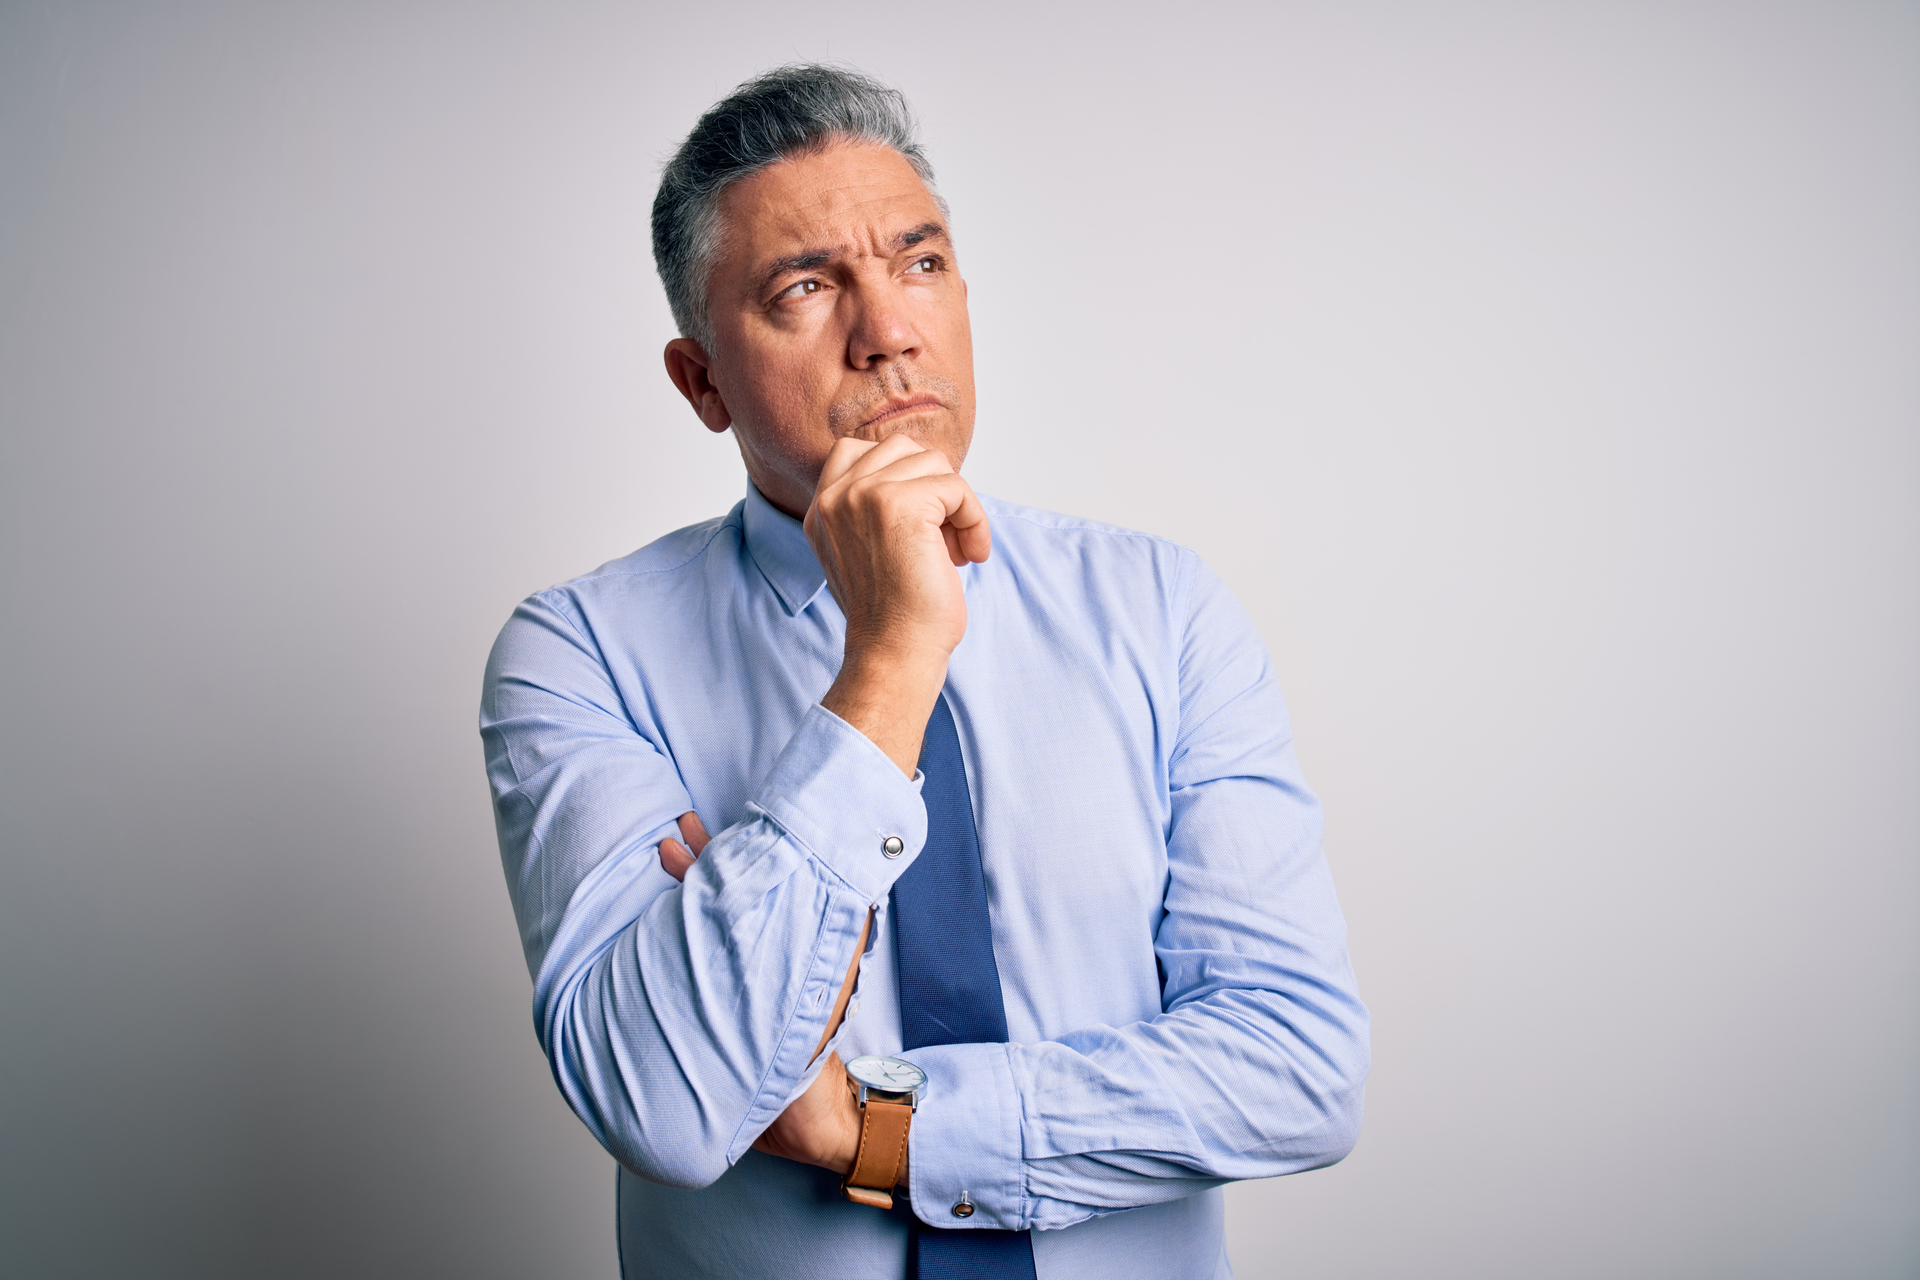 Middle age grey-haired business man wearing elegant shirt and tie with hand on chin thinking about question